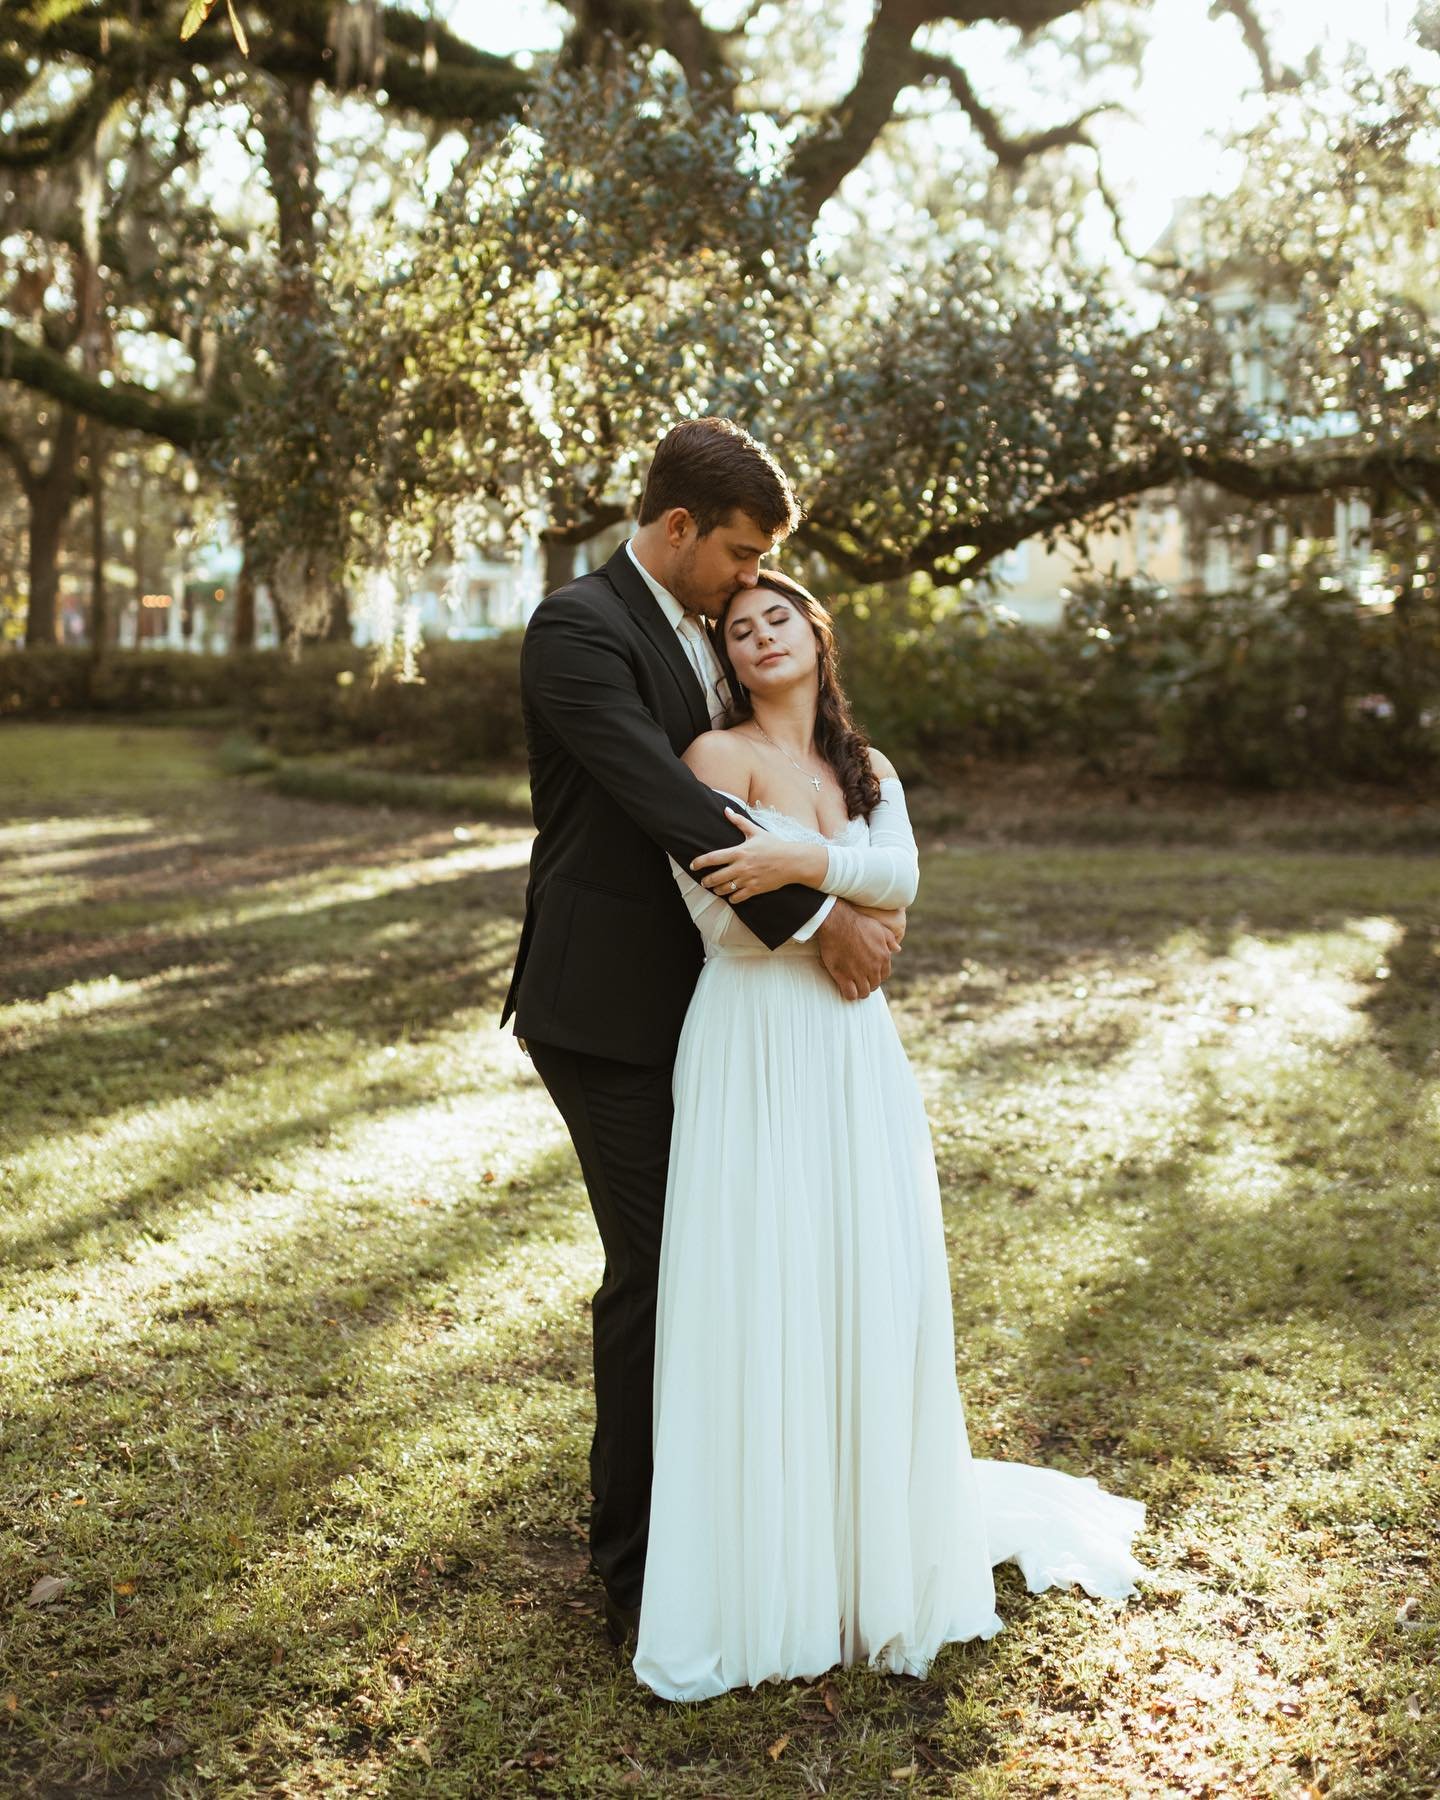 Elise + Foster 😍 you two are PERFECTION! I&rsquo;m so so grateful I was able to photograph one last wedding day in Savannah before we moved! Also, let&rsquo;s give it up for those accidental blurry photos that are the most magical of all ✨